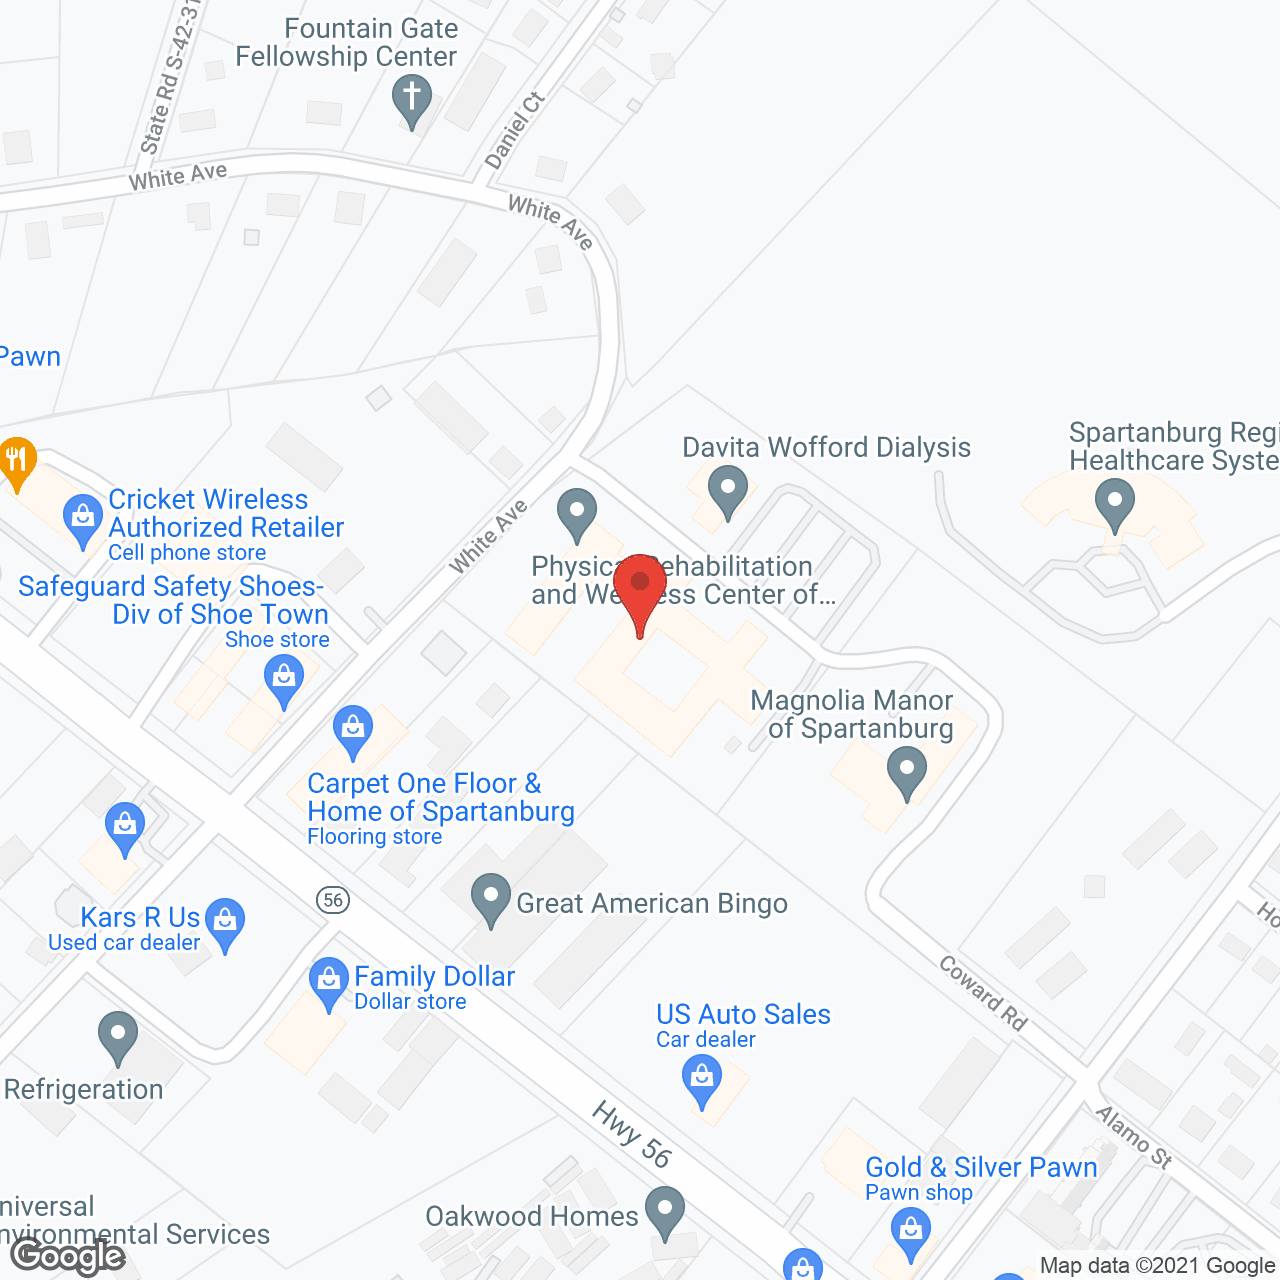 Physical Rehab and Wellness Center of Spartanburg in google map